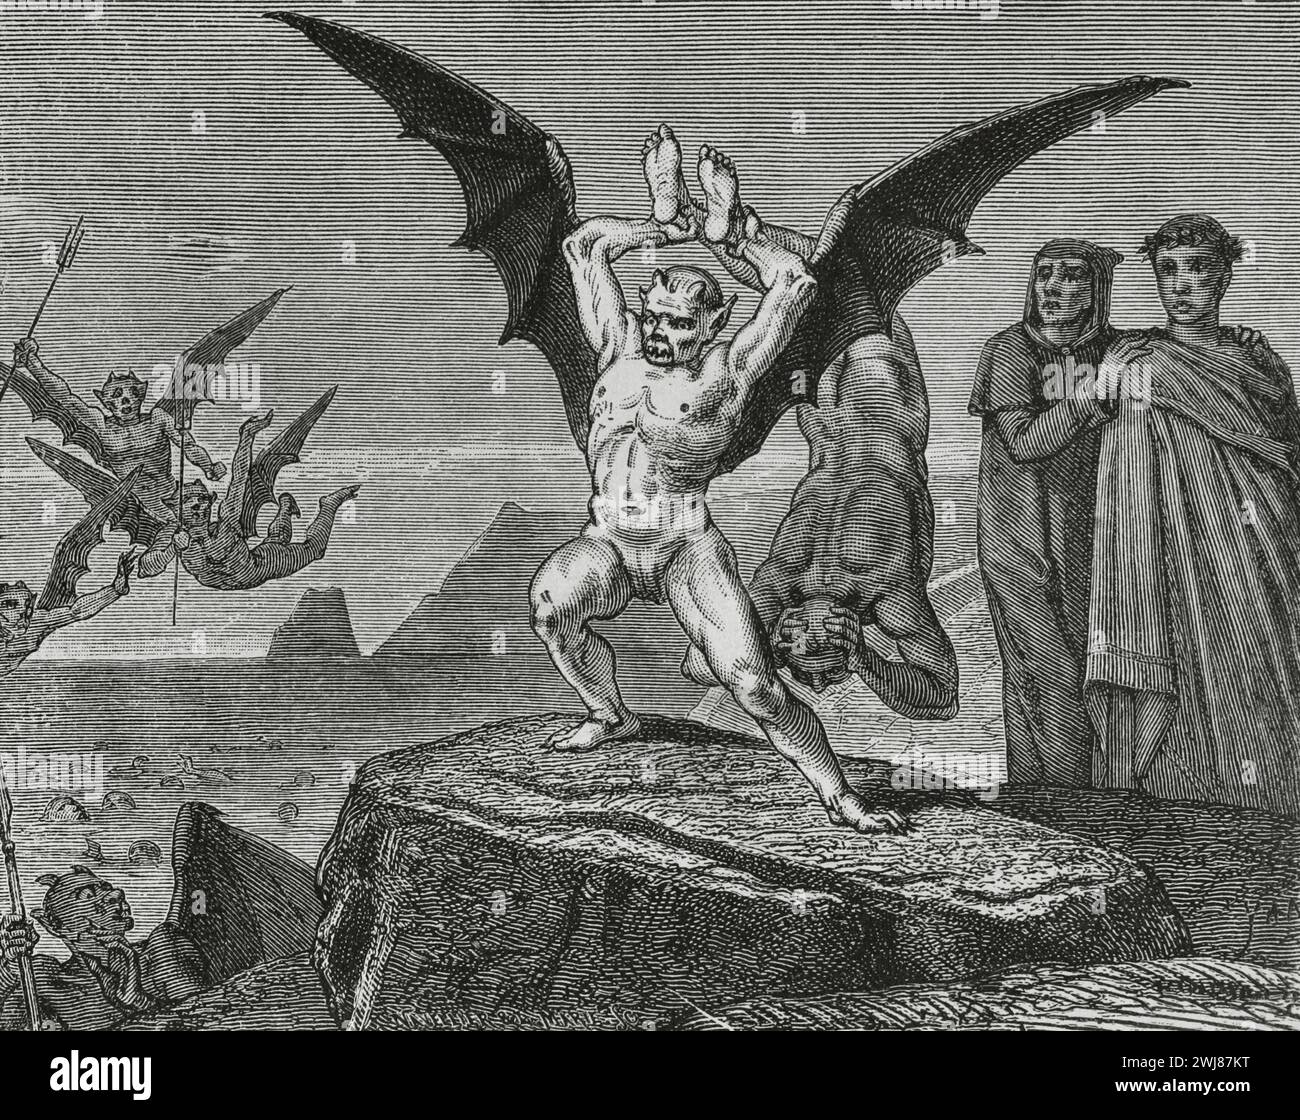 The Divine Comedy (1307-1321). Italian narrative poem by the Italian poet Dante Alighieri (1265-1321). Inferno (Hell). 'High on his shoulders, sharp and tall, he carried a sinner...' Illustration by Yann Dargent (1824-1899). Engraving by Navellier & L. Marie. Published in Paris, 1888. Stock Photo